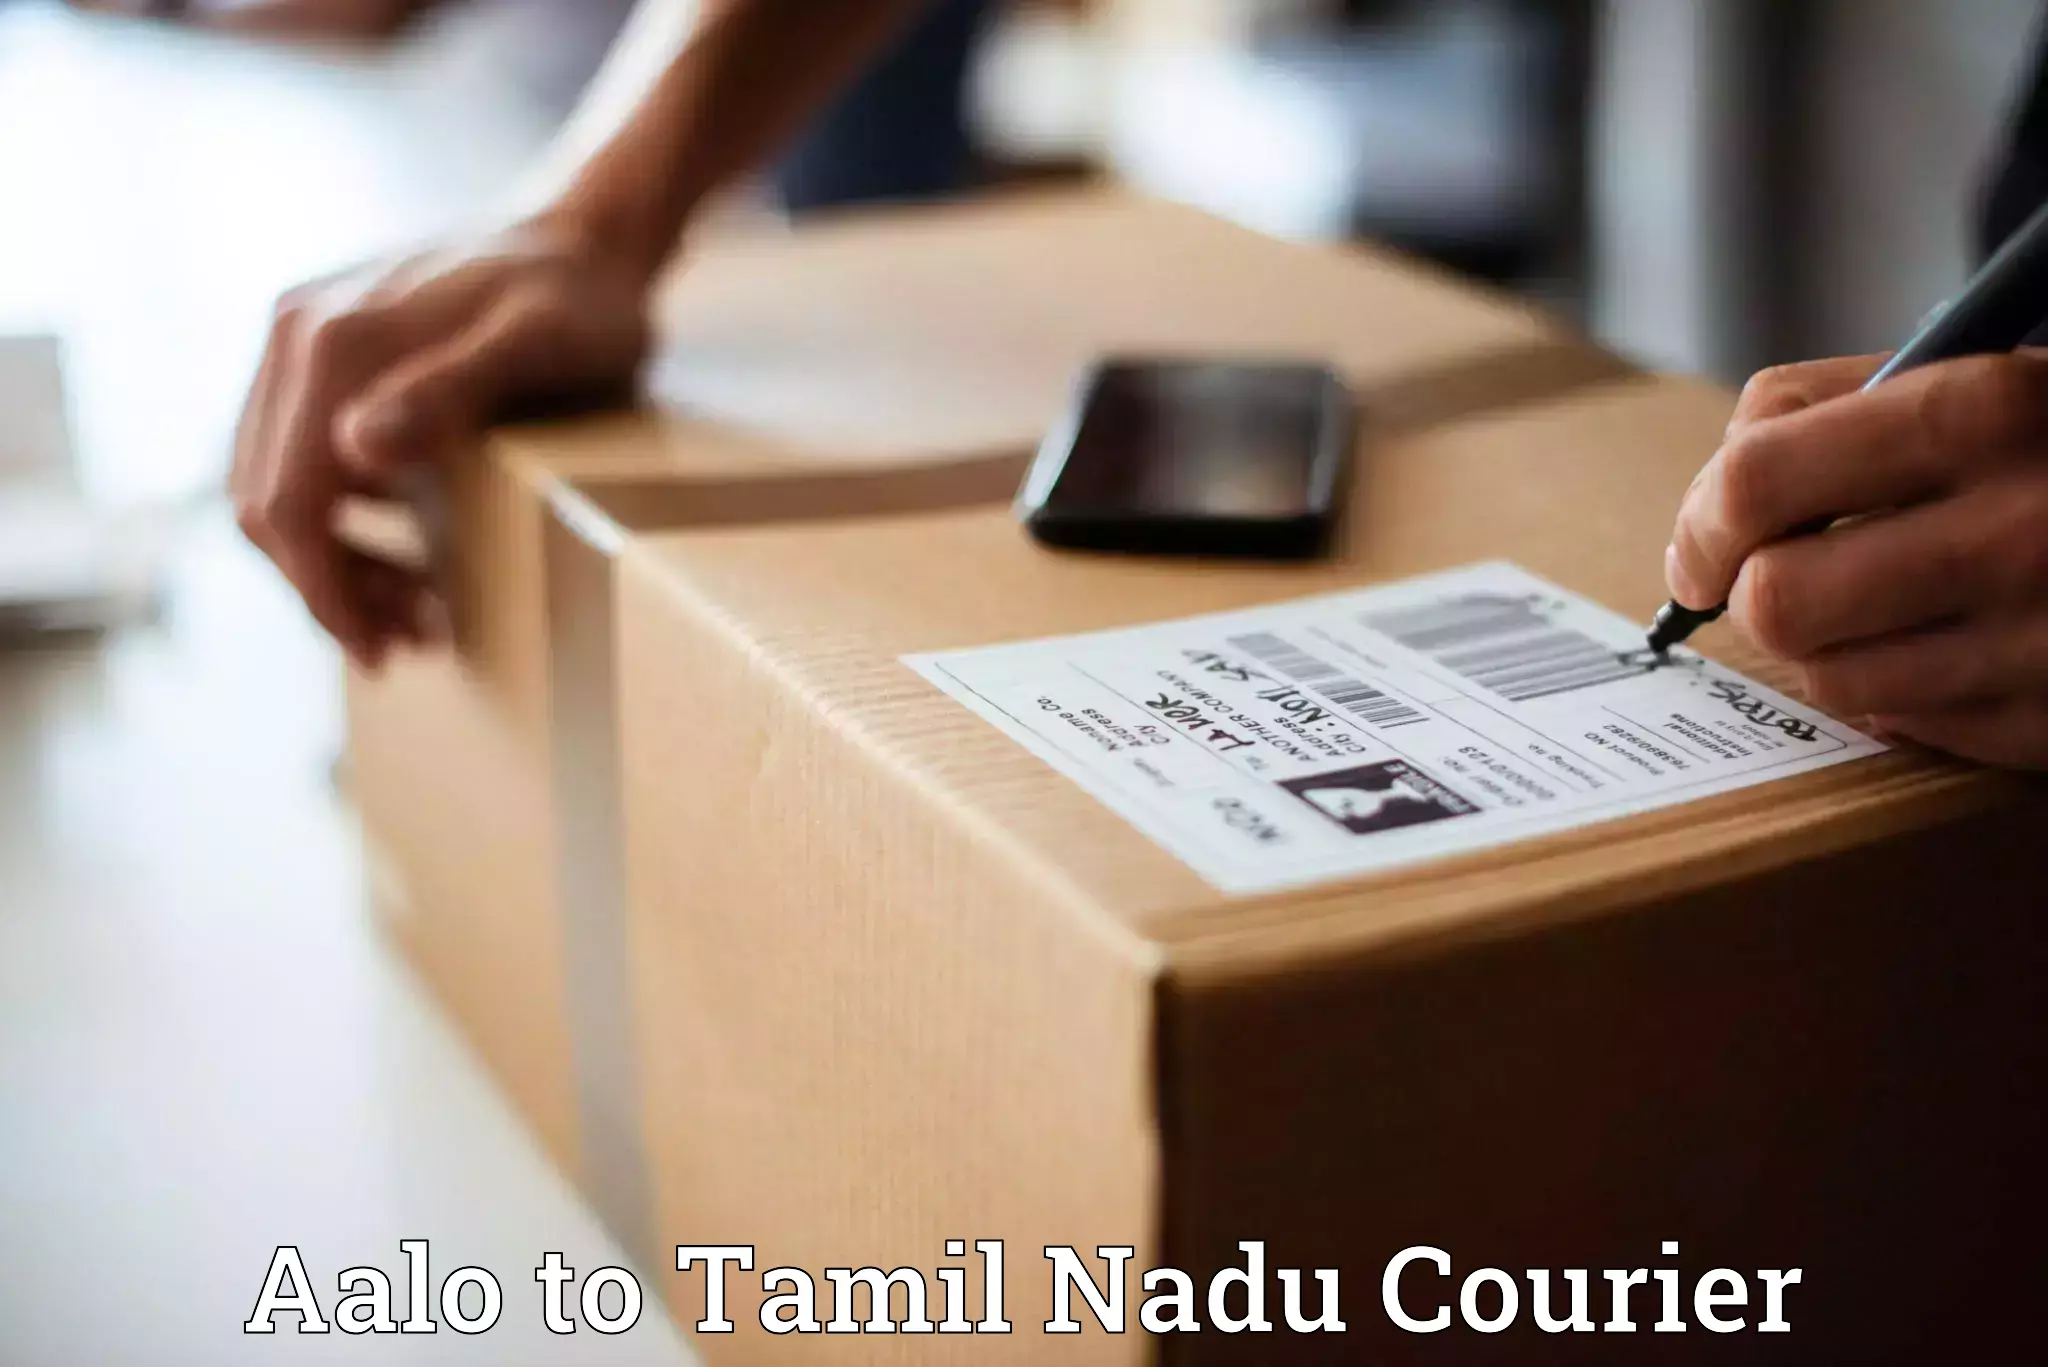 Customizable shipping options Aalo to Tamil Nadu